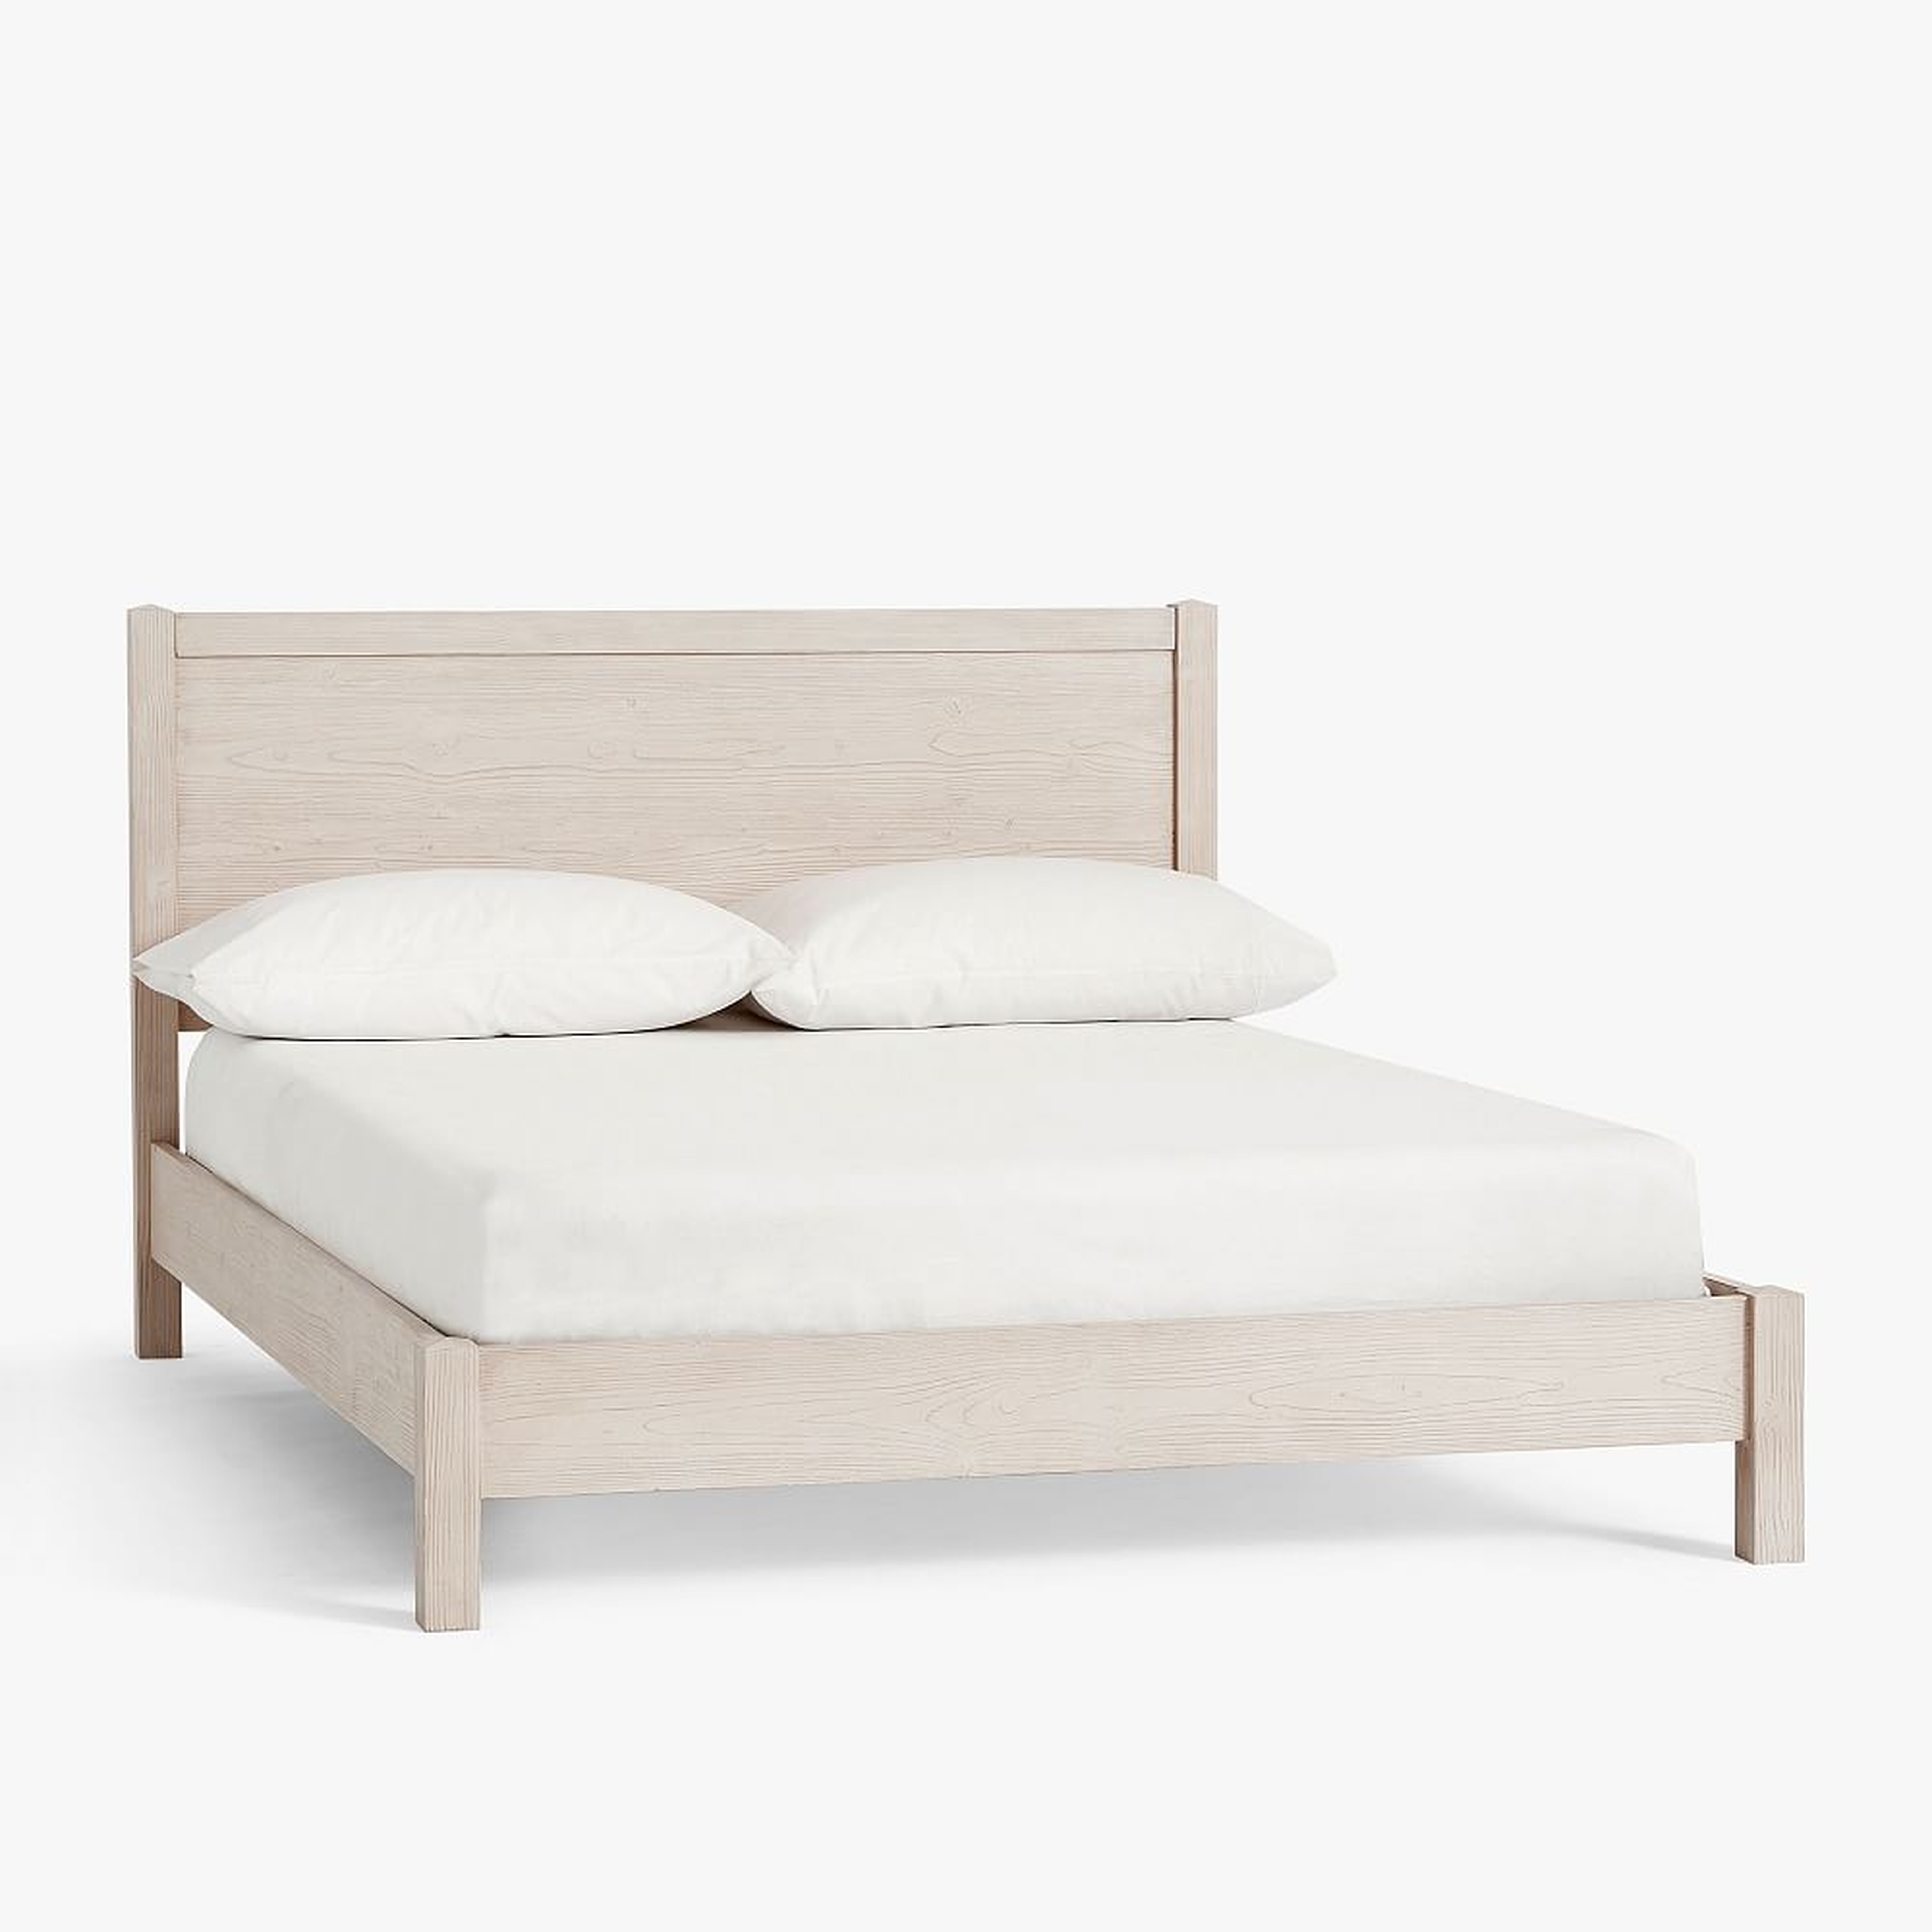 Costa Classic Bed, Queen, Weathered White - Pottery Barn Teen